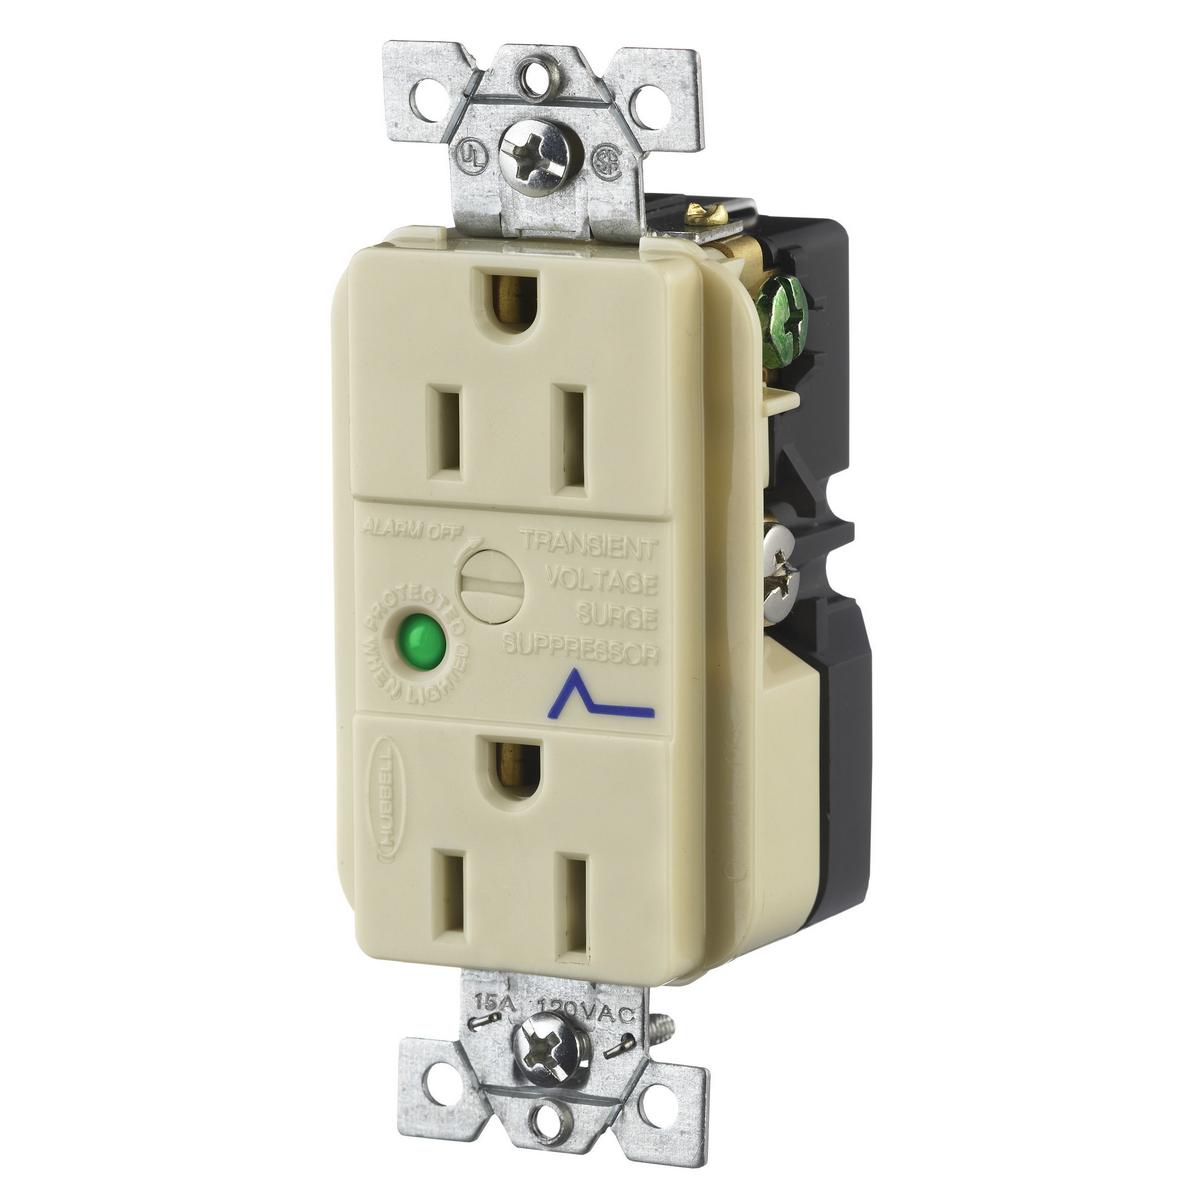 Hubbell HBL5260ISA Surge Protective Devices, SPIKESHIELD TVSS Duplex Receptacle with Light, 15A 125V, 5-15R, Ivory  ; Automatic self-grounding staple ; Distinctive surge symbol provides quick identification ; Power-on indicator light verifies that power is available ; Alert